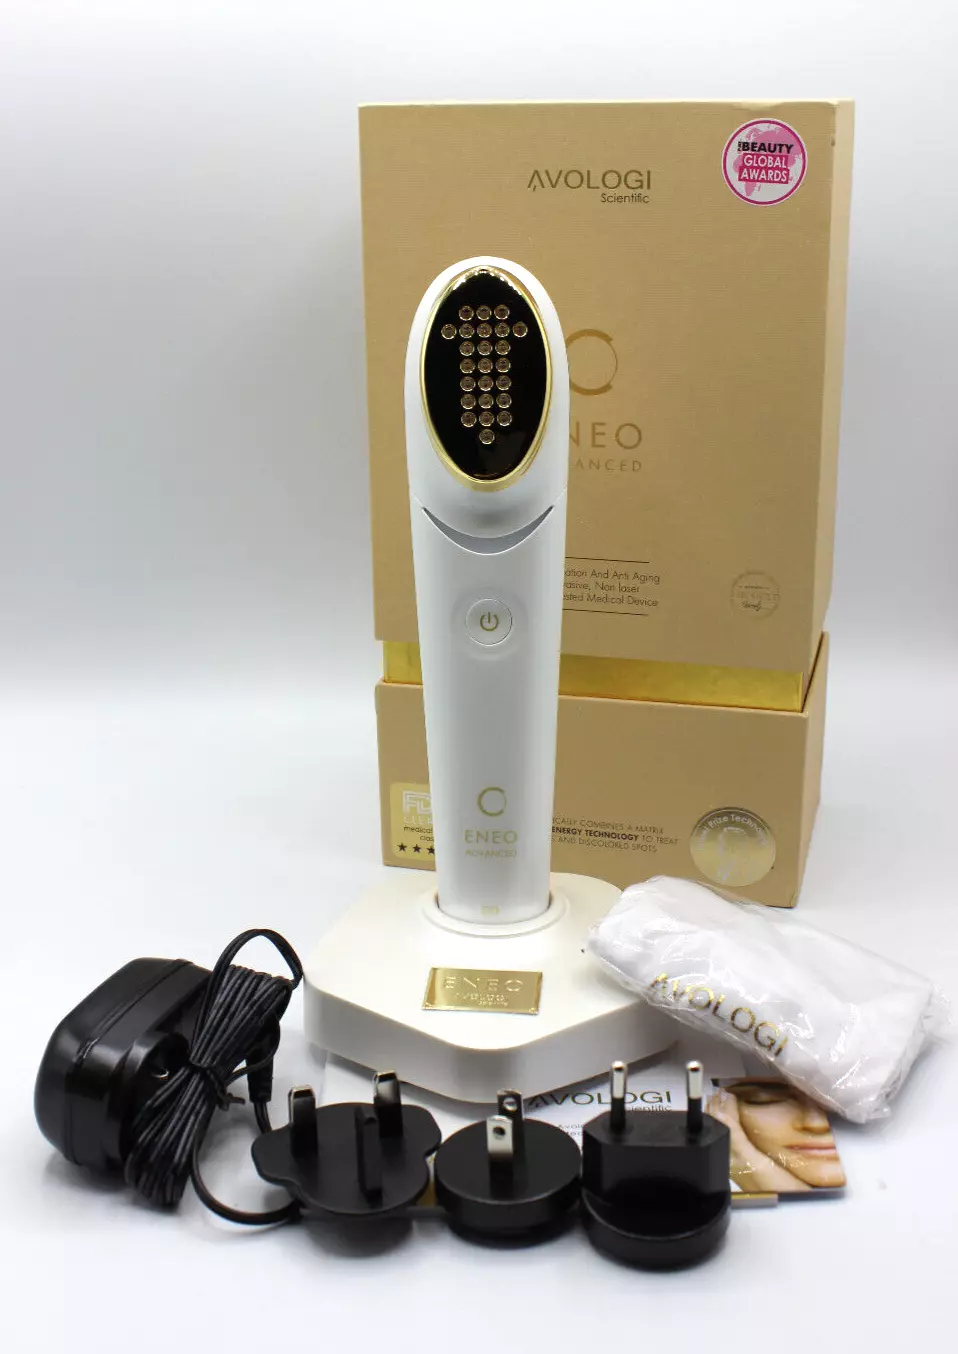 Advanced Anti-Aging LED Thermal Skin Therapy Professional Device - $890.00